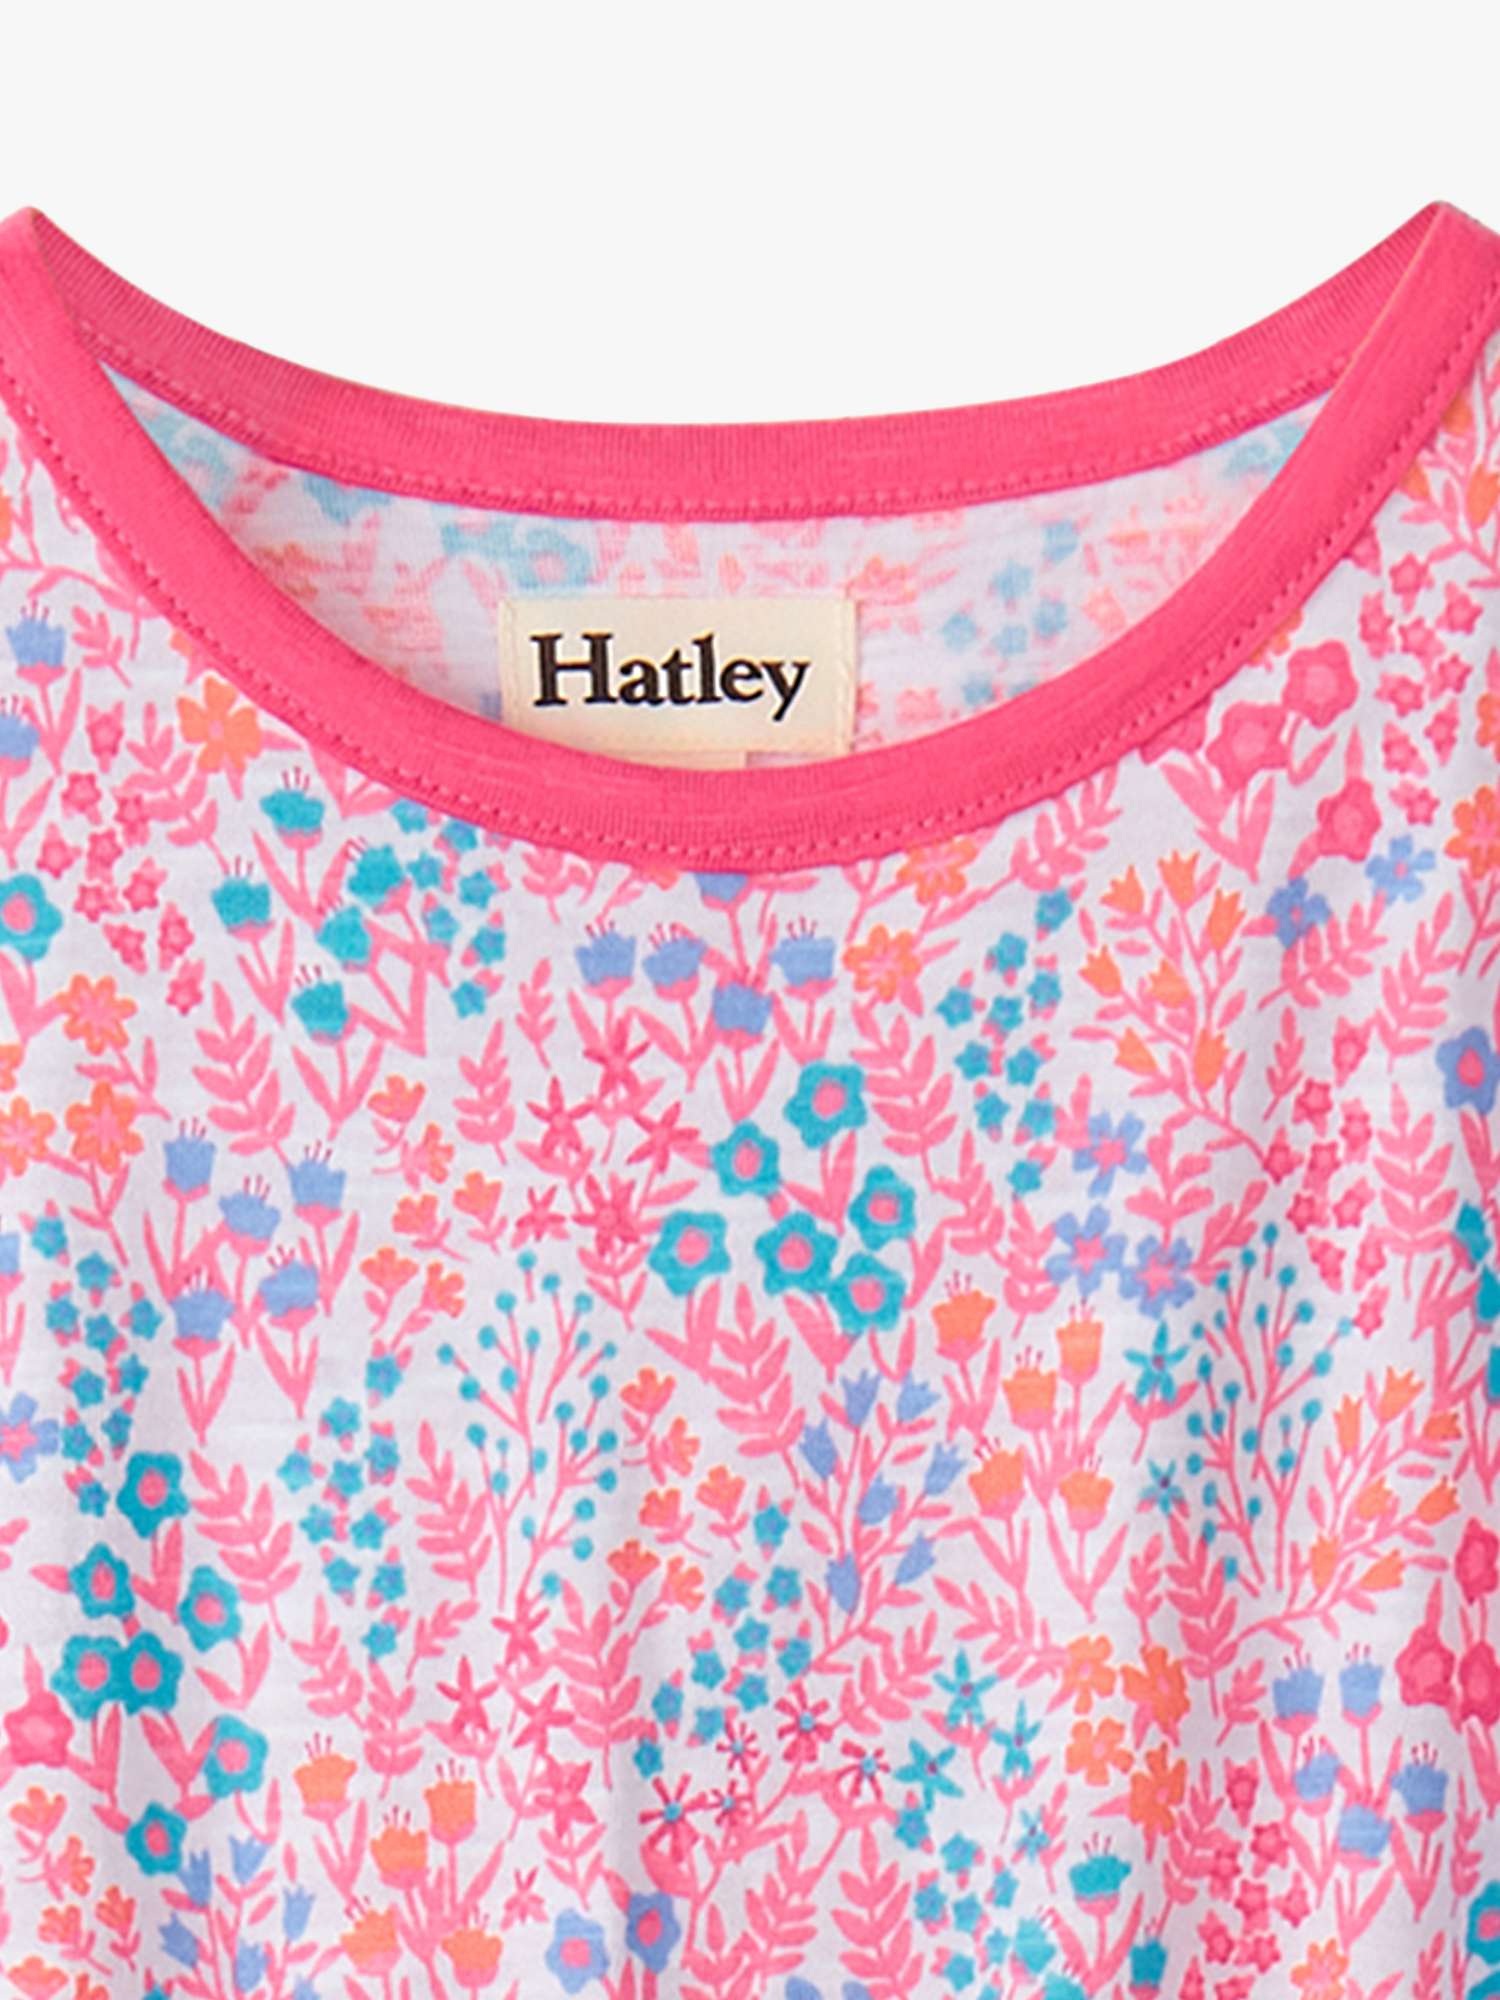 Buy Hatley Kids' Ditsy Floral Relaxed Fit Dress, White/Multi Online at johnlewis.com